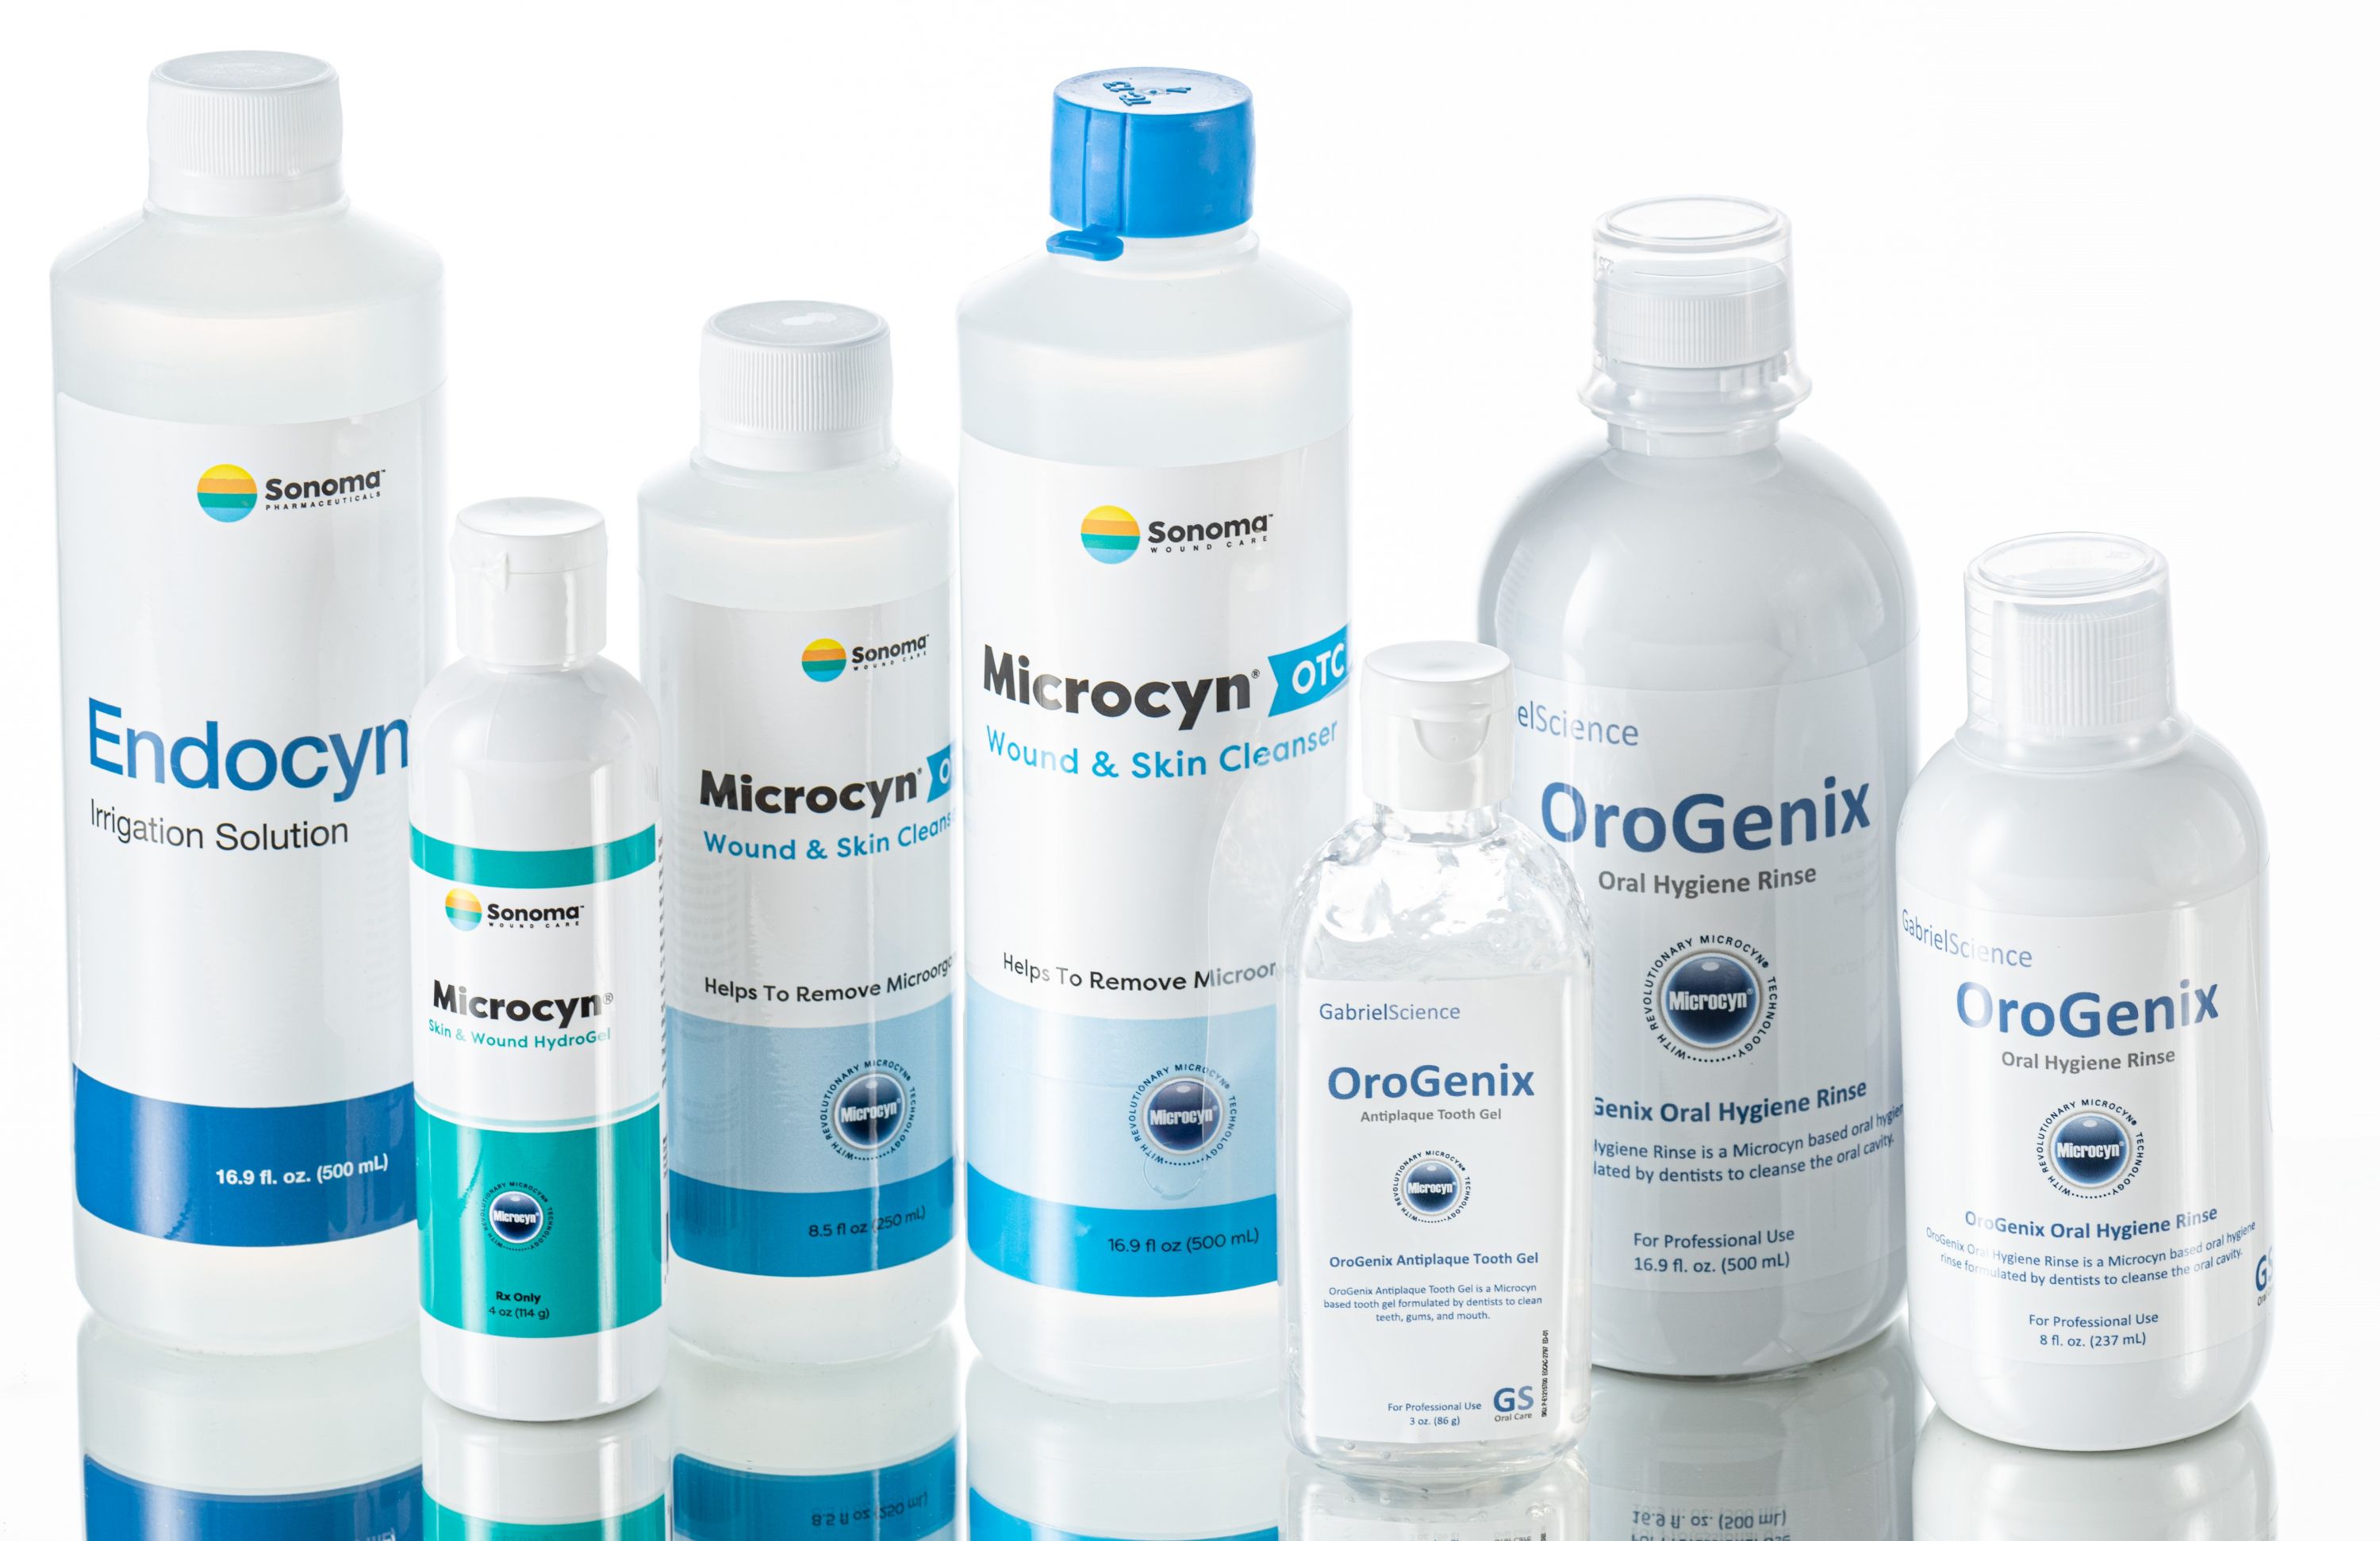 Microcyn HOCL Products